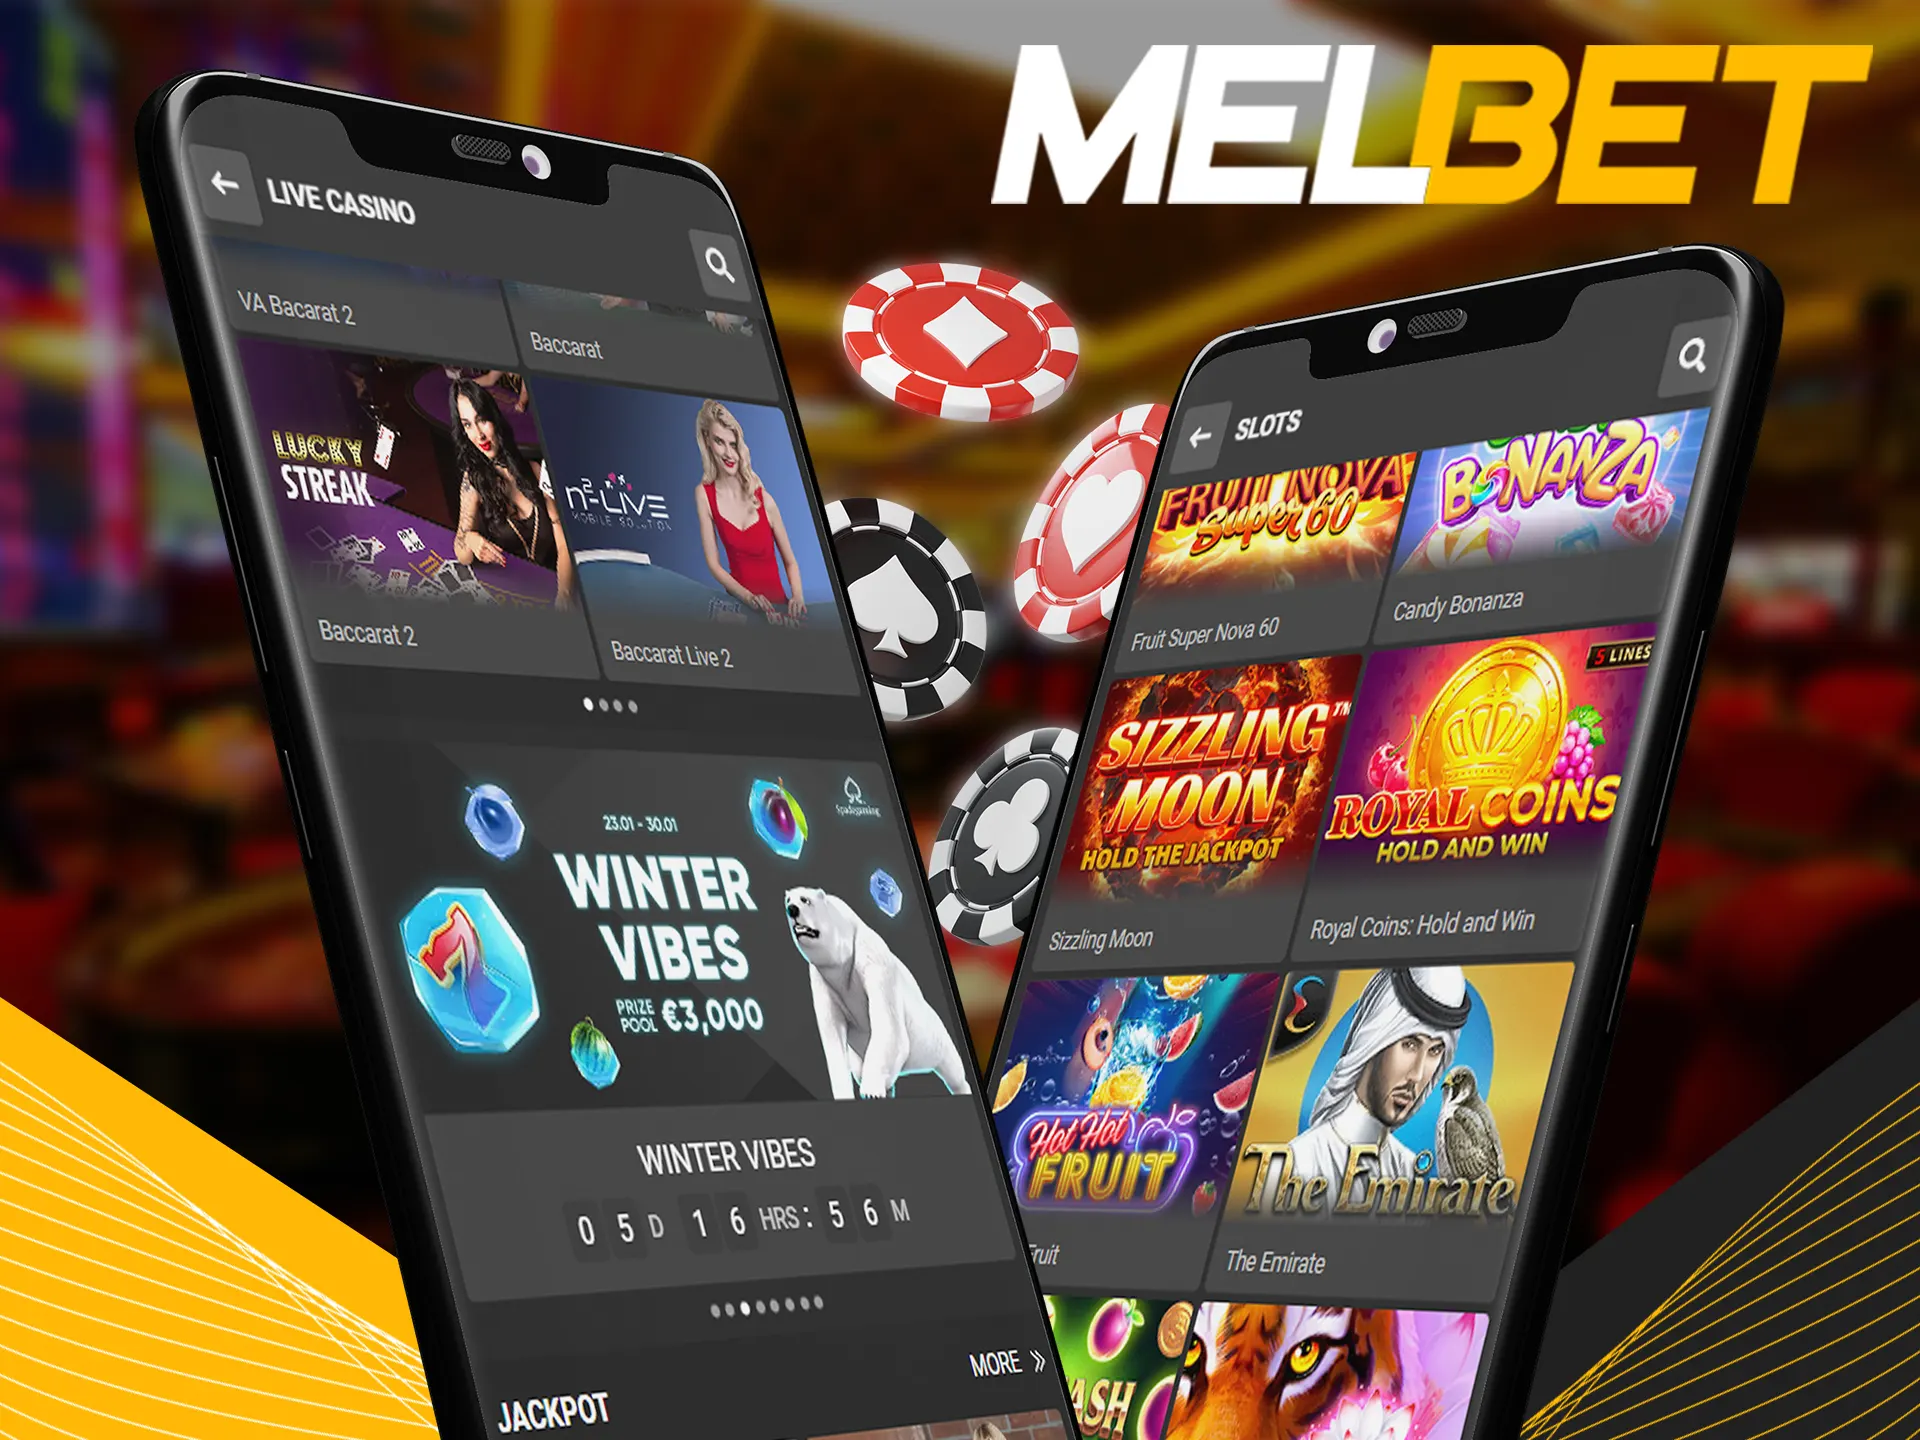 Search for your favourite casino games in app.